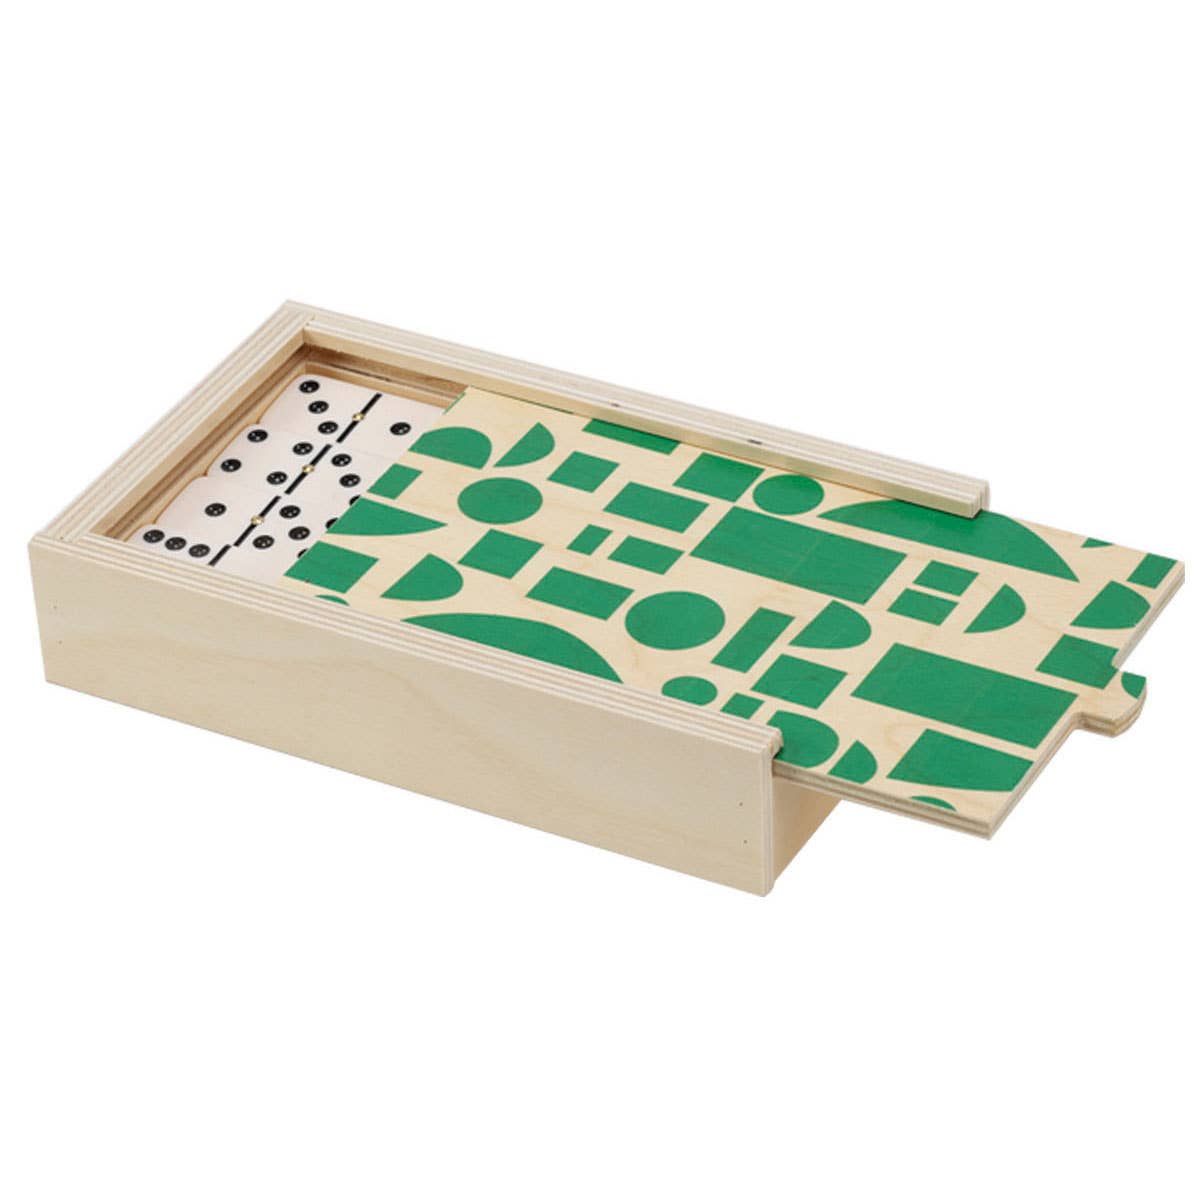 dominoes in a hand painted wood box